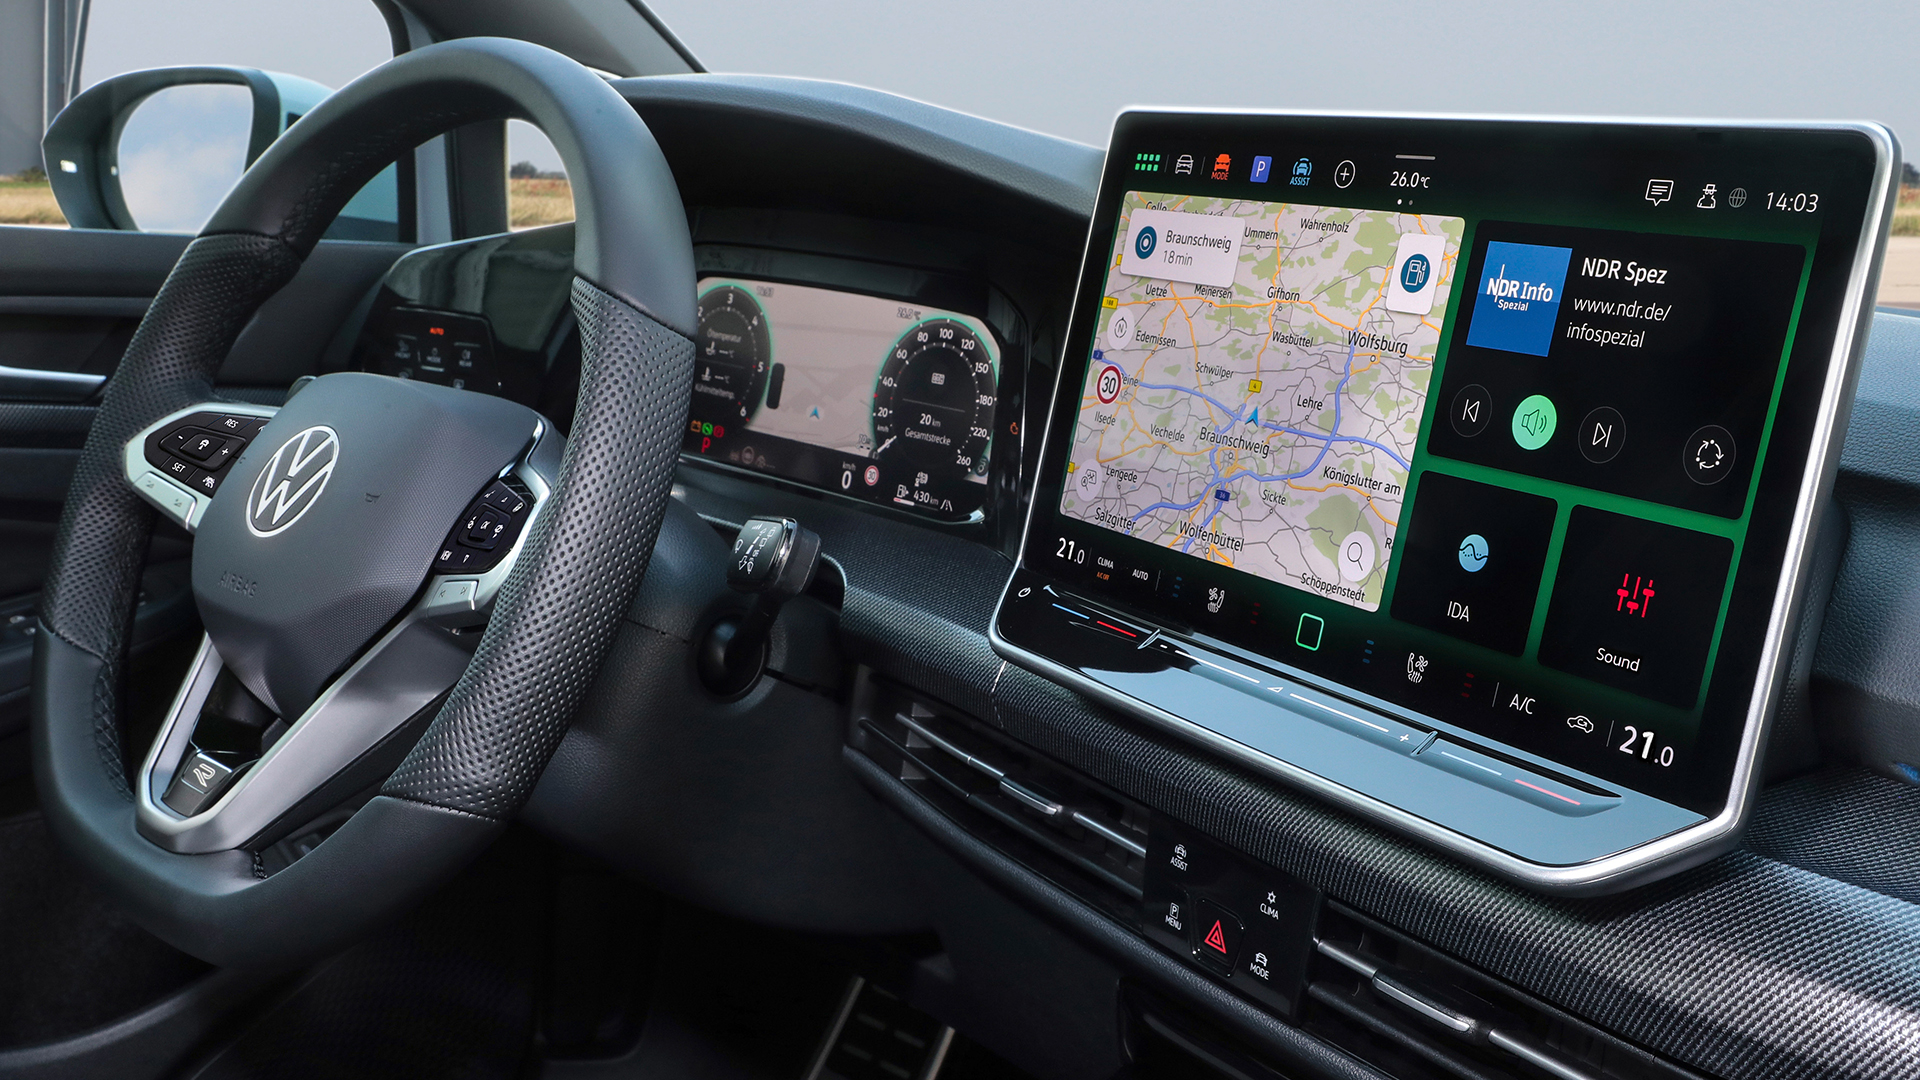 Volkswagen is adding ChatGPT to its infotainment system